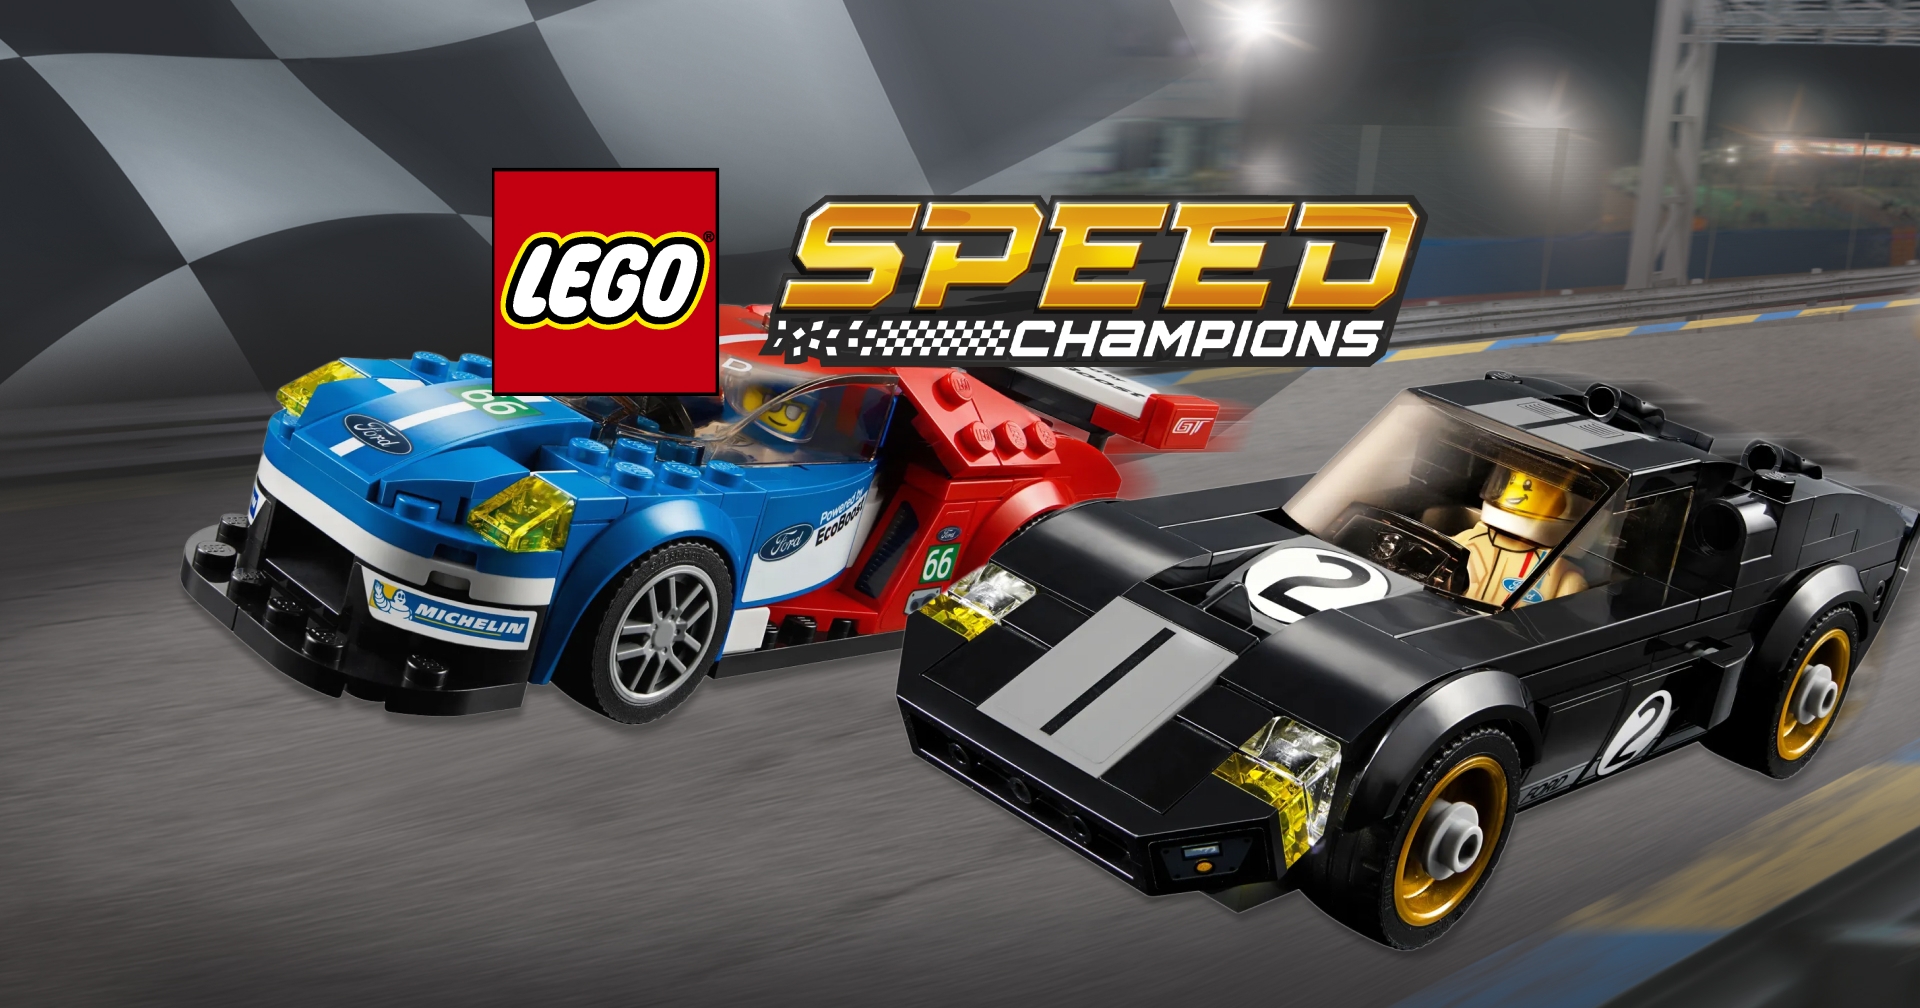 Solved Create a two-player car race game app. The race